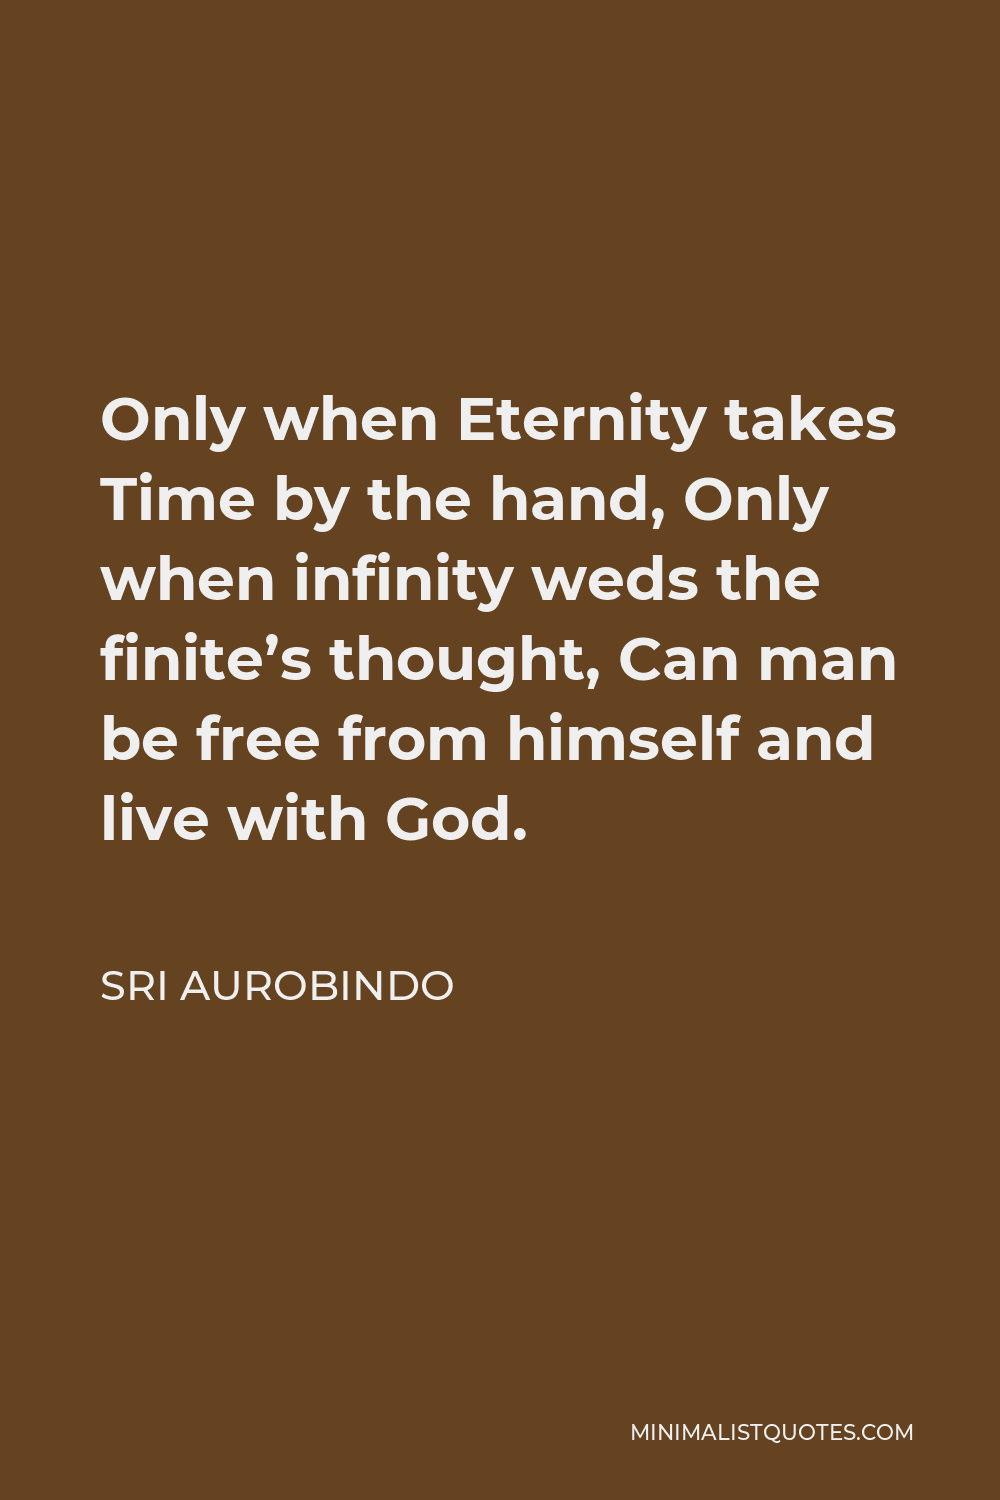 Sri Aurobindo Quote - Only when Eternity takes Time by the hand, Only when infinity weds the finite’s thought, Can man be free from himself and live with God.